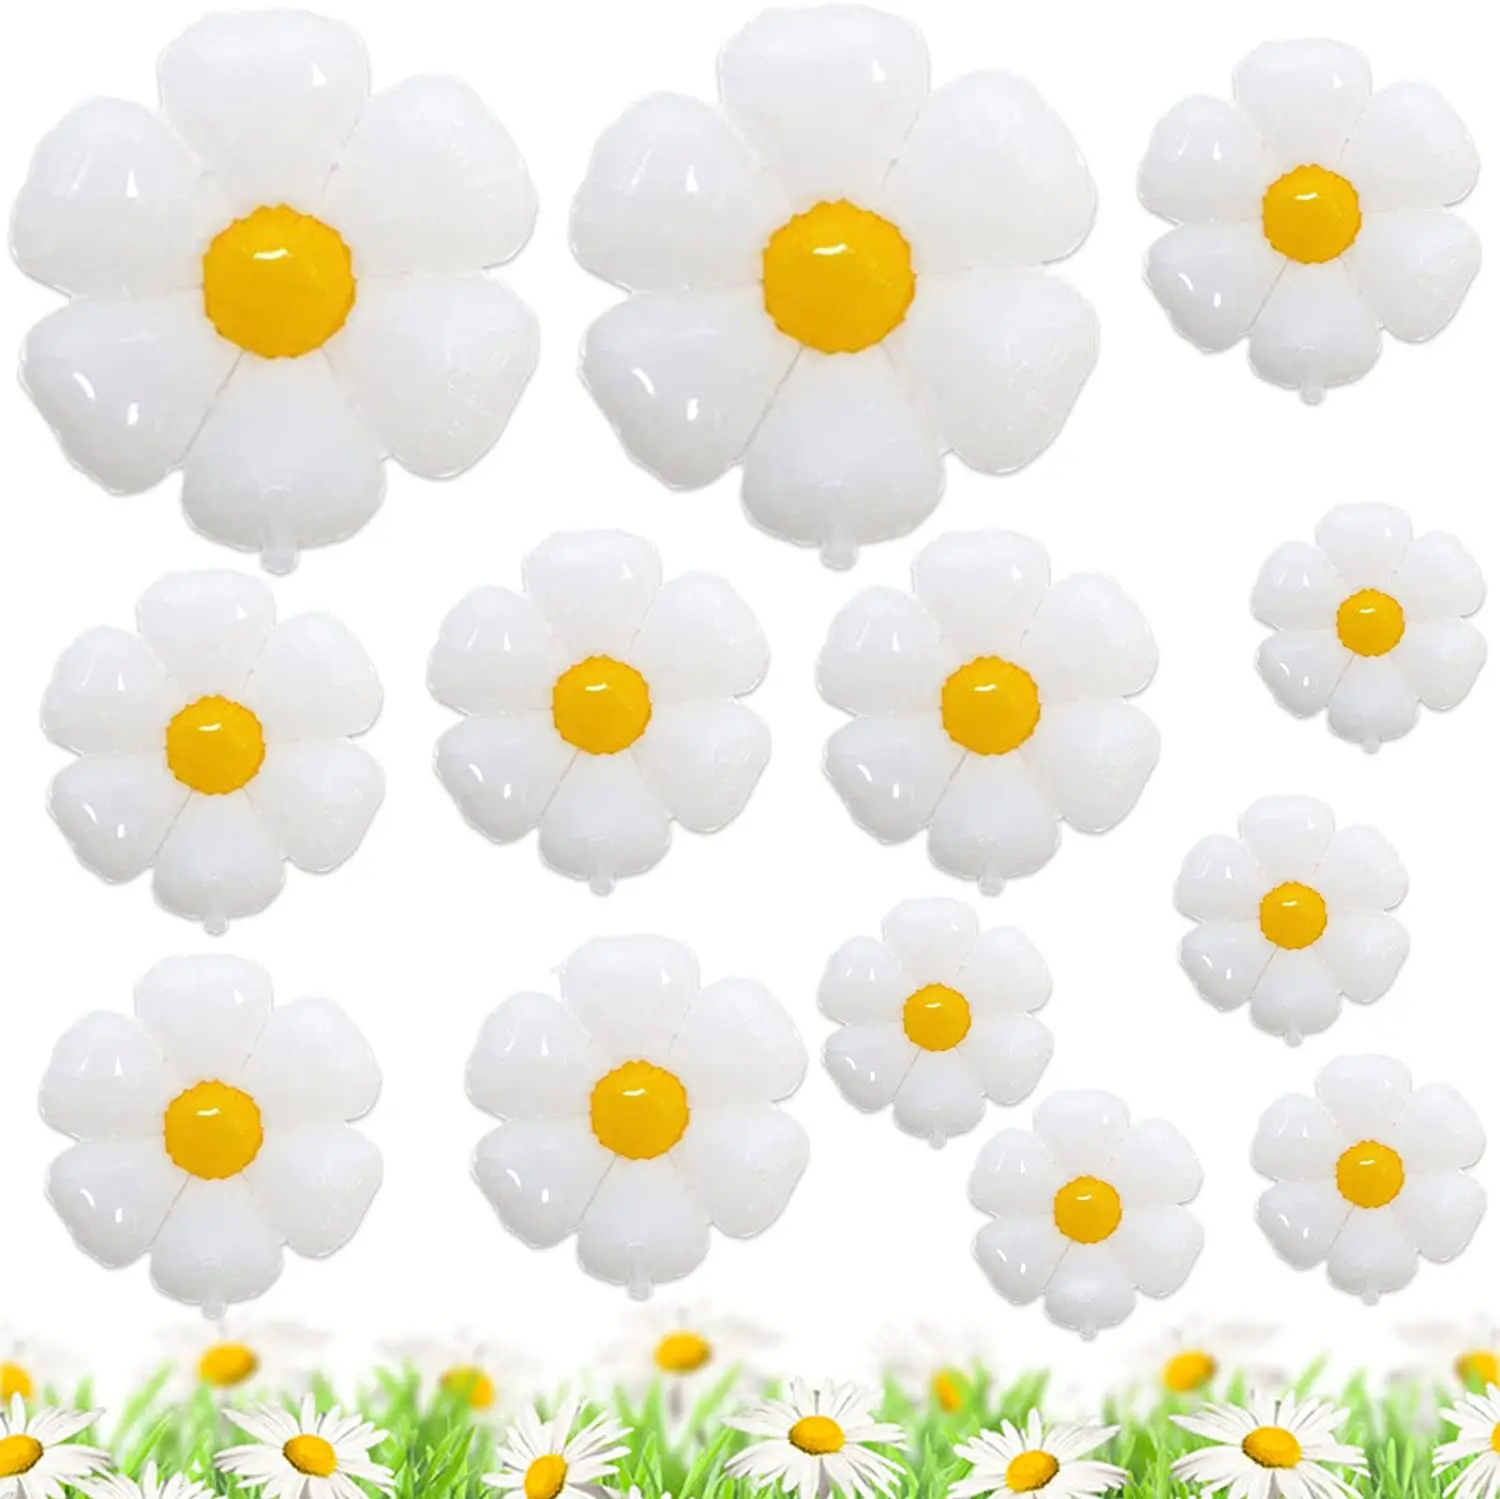 

Macaron White Daisy Flower Foil Balloon SunFlower Balloons Toy INS Hot Photo Props Wedding Birthday Party Baby Shower Decoration